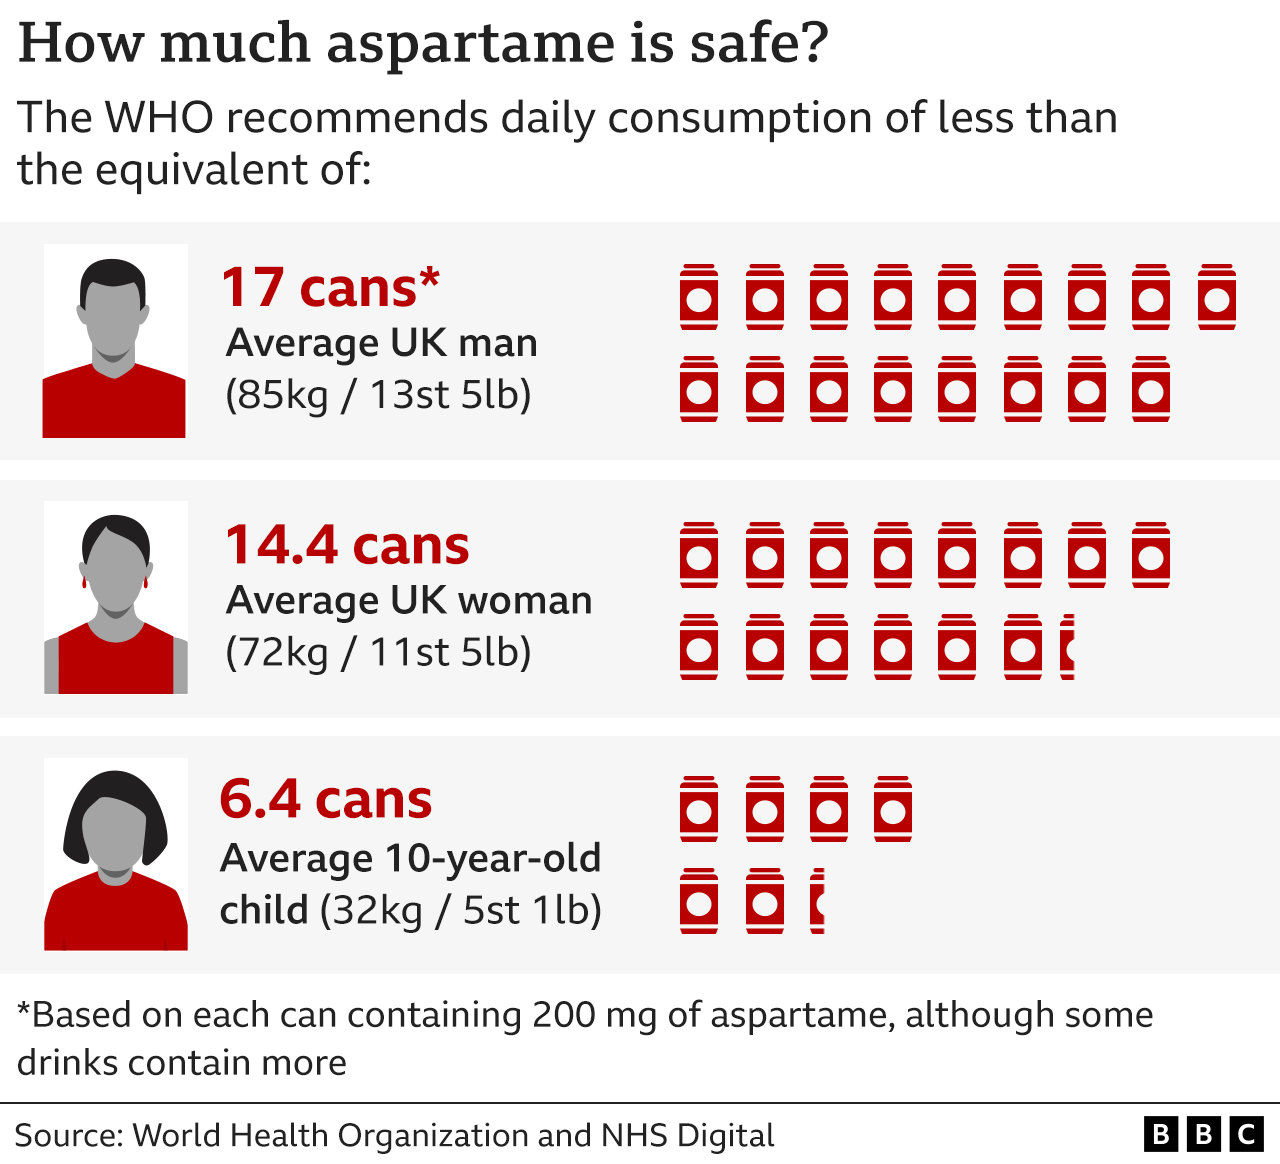 Graphic showing the maximum amount of aspartame that can be ingested daily before it becomes a cancer risk: Men can drink up to the equivalent of 17 cans of fizzy drink containing 200mg of aspartame; Women can drink up to the equivalent of 14.4 cans; a 10-year-old child can drink up to the equivalent of 6.4 cans.